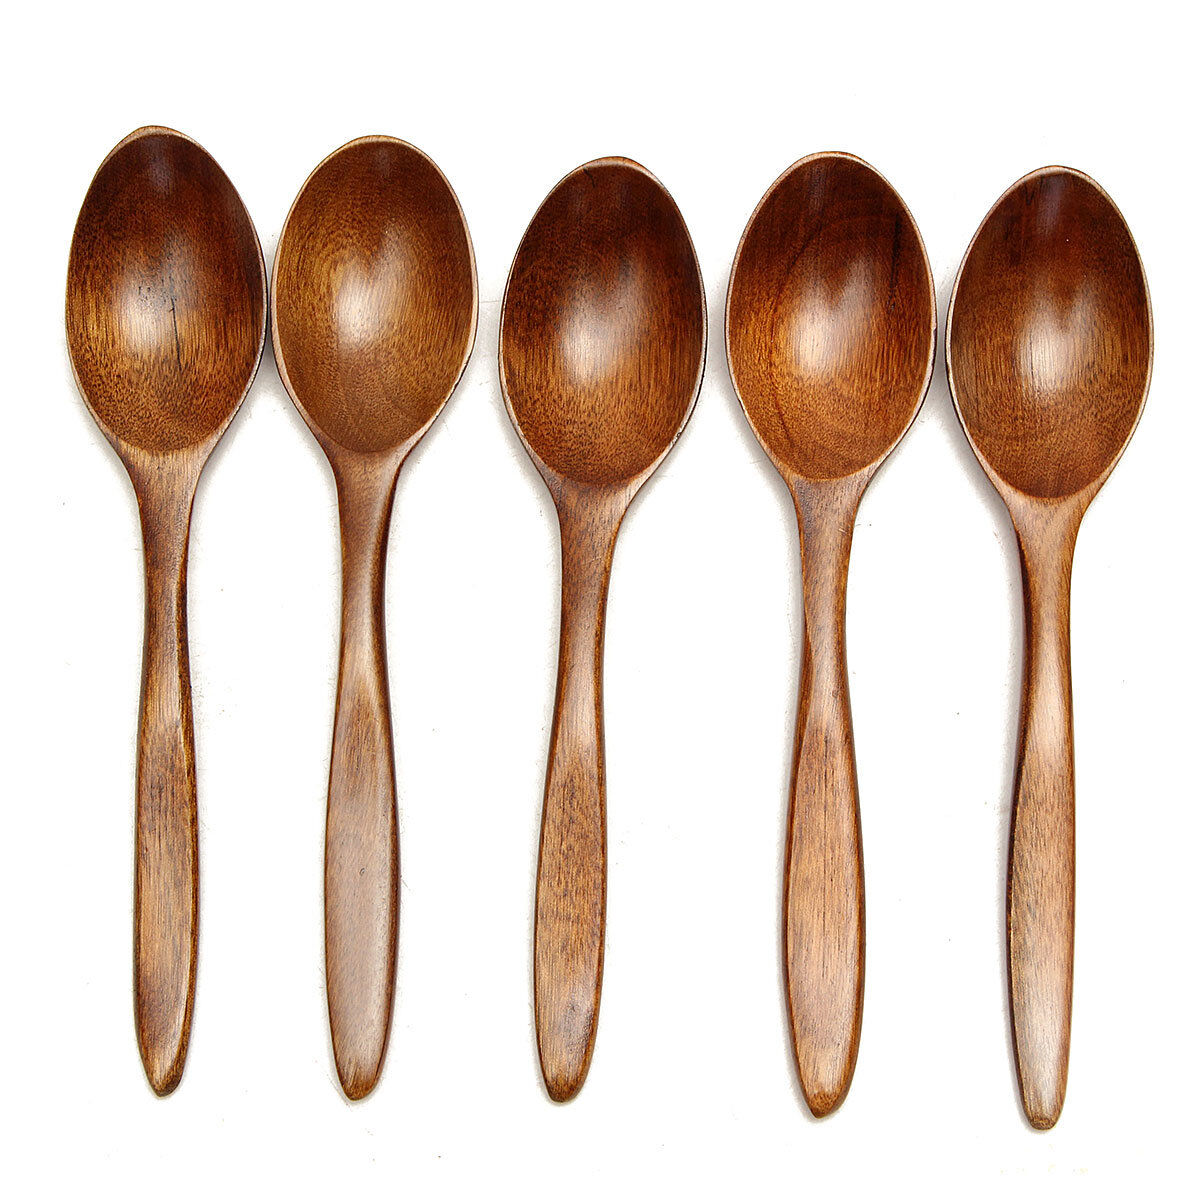 Newchic 5Pcs Wooden Cooking Kitchen Utensil Coffee Tea Ice Cream Soup Caterin Spoon Tool